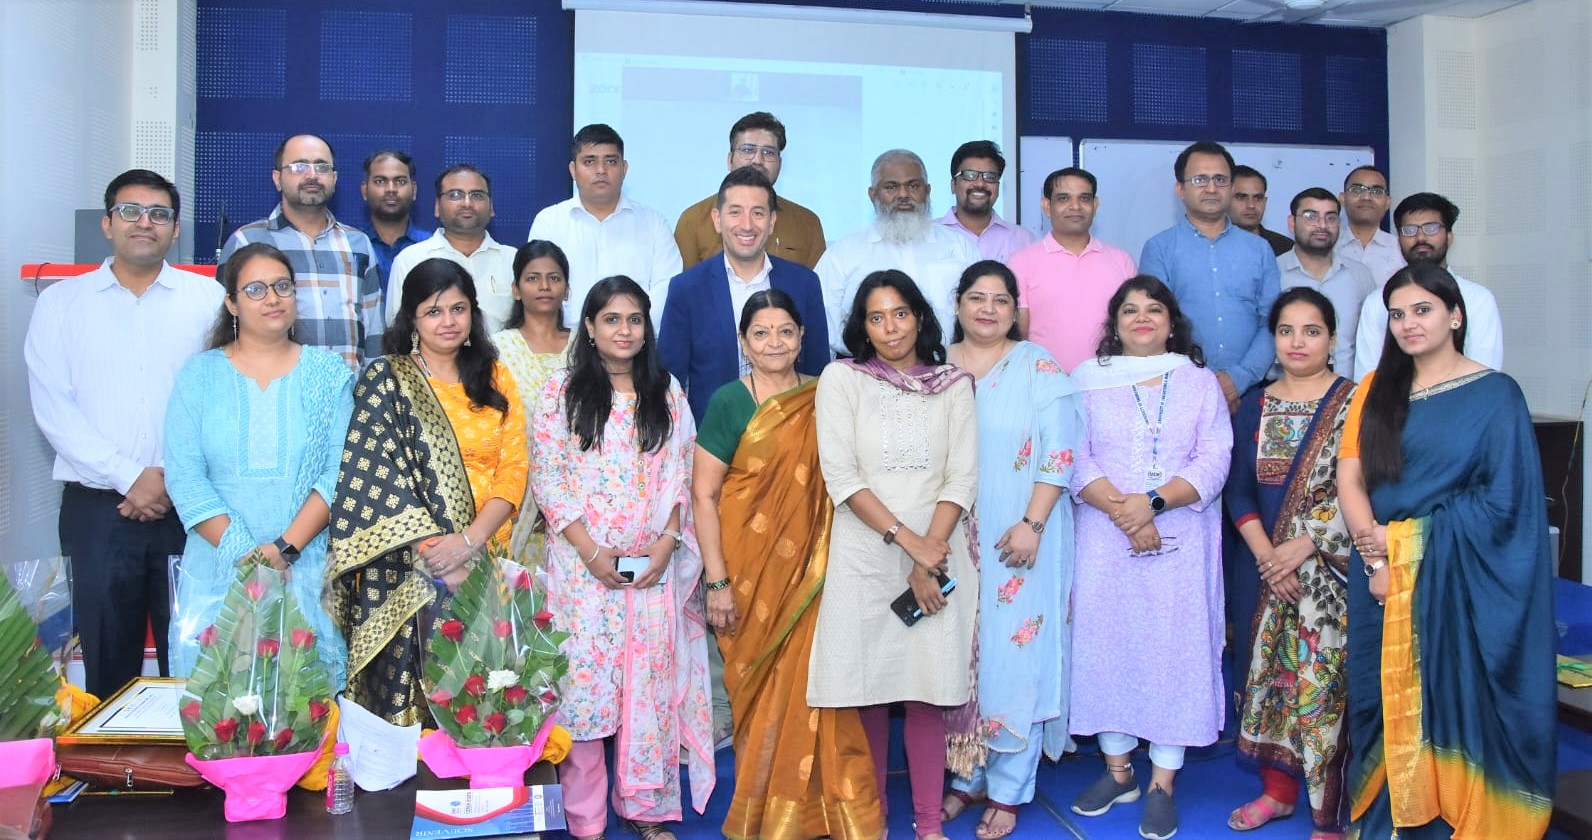 2nd International Conference on “Computational Applied Sciences and its Applications” (ICCASA 2023) Held on 13th and 14th July 2023 in Hybrid Mode at University of Engineering and Management, Jaipur